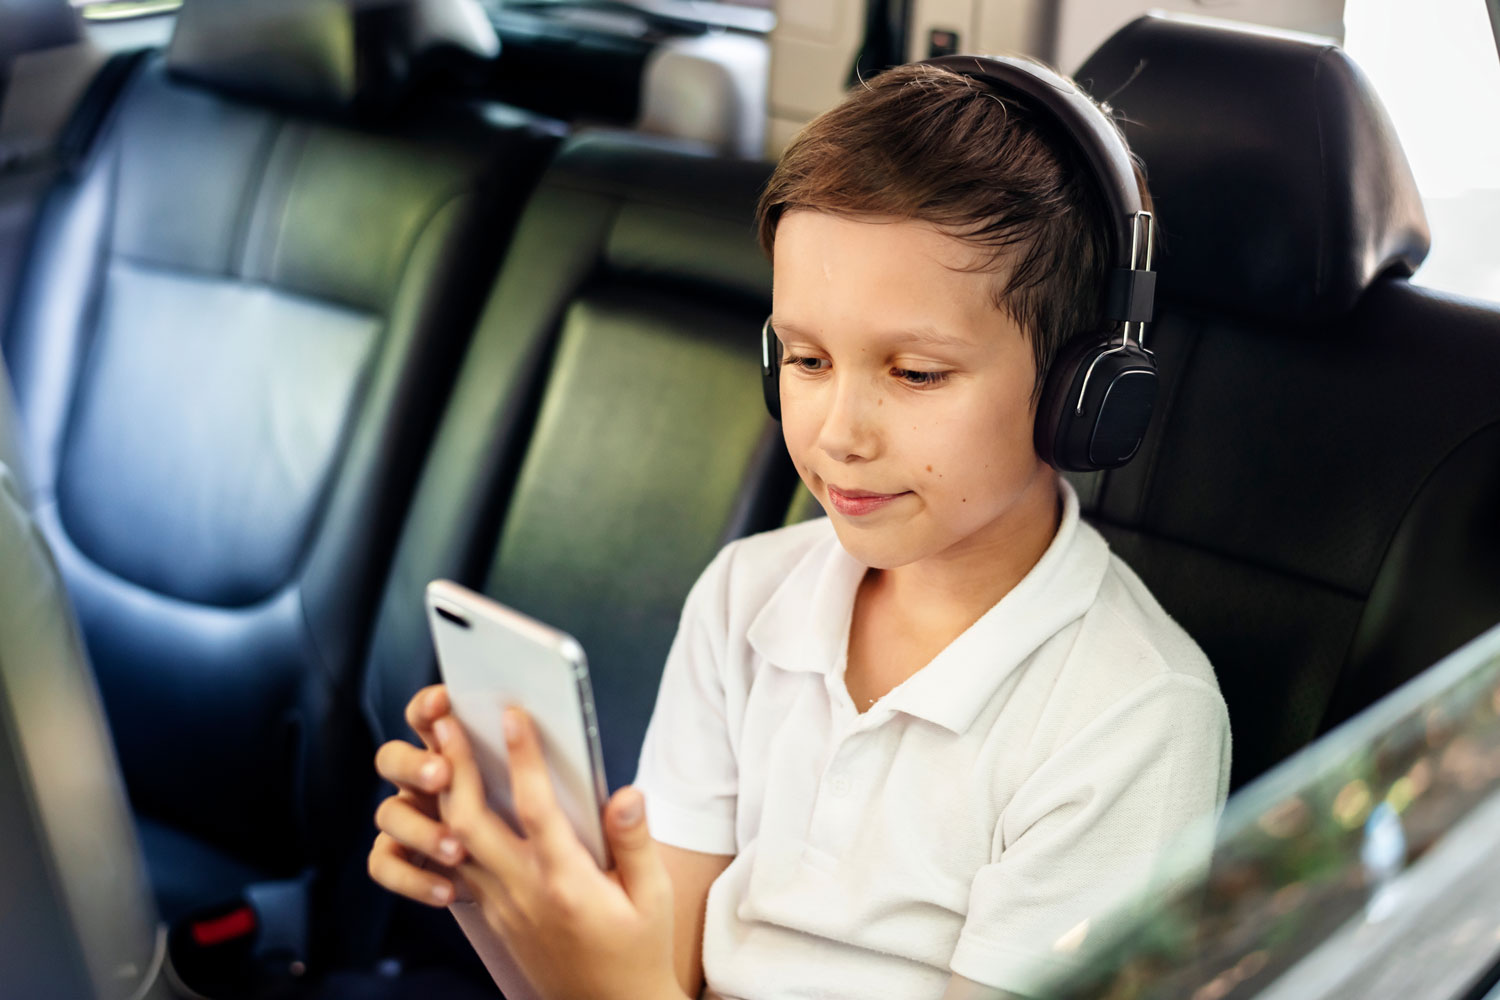 Child using phone in car with headphones